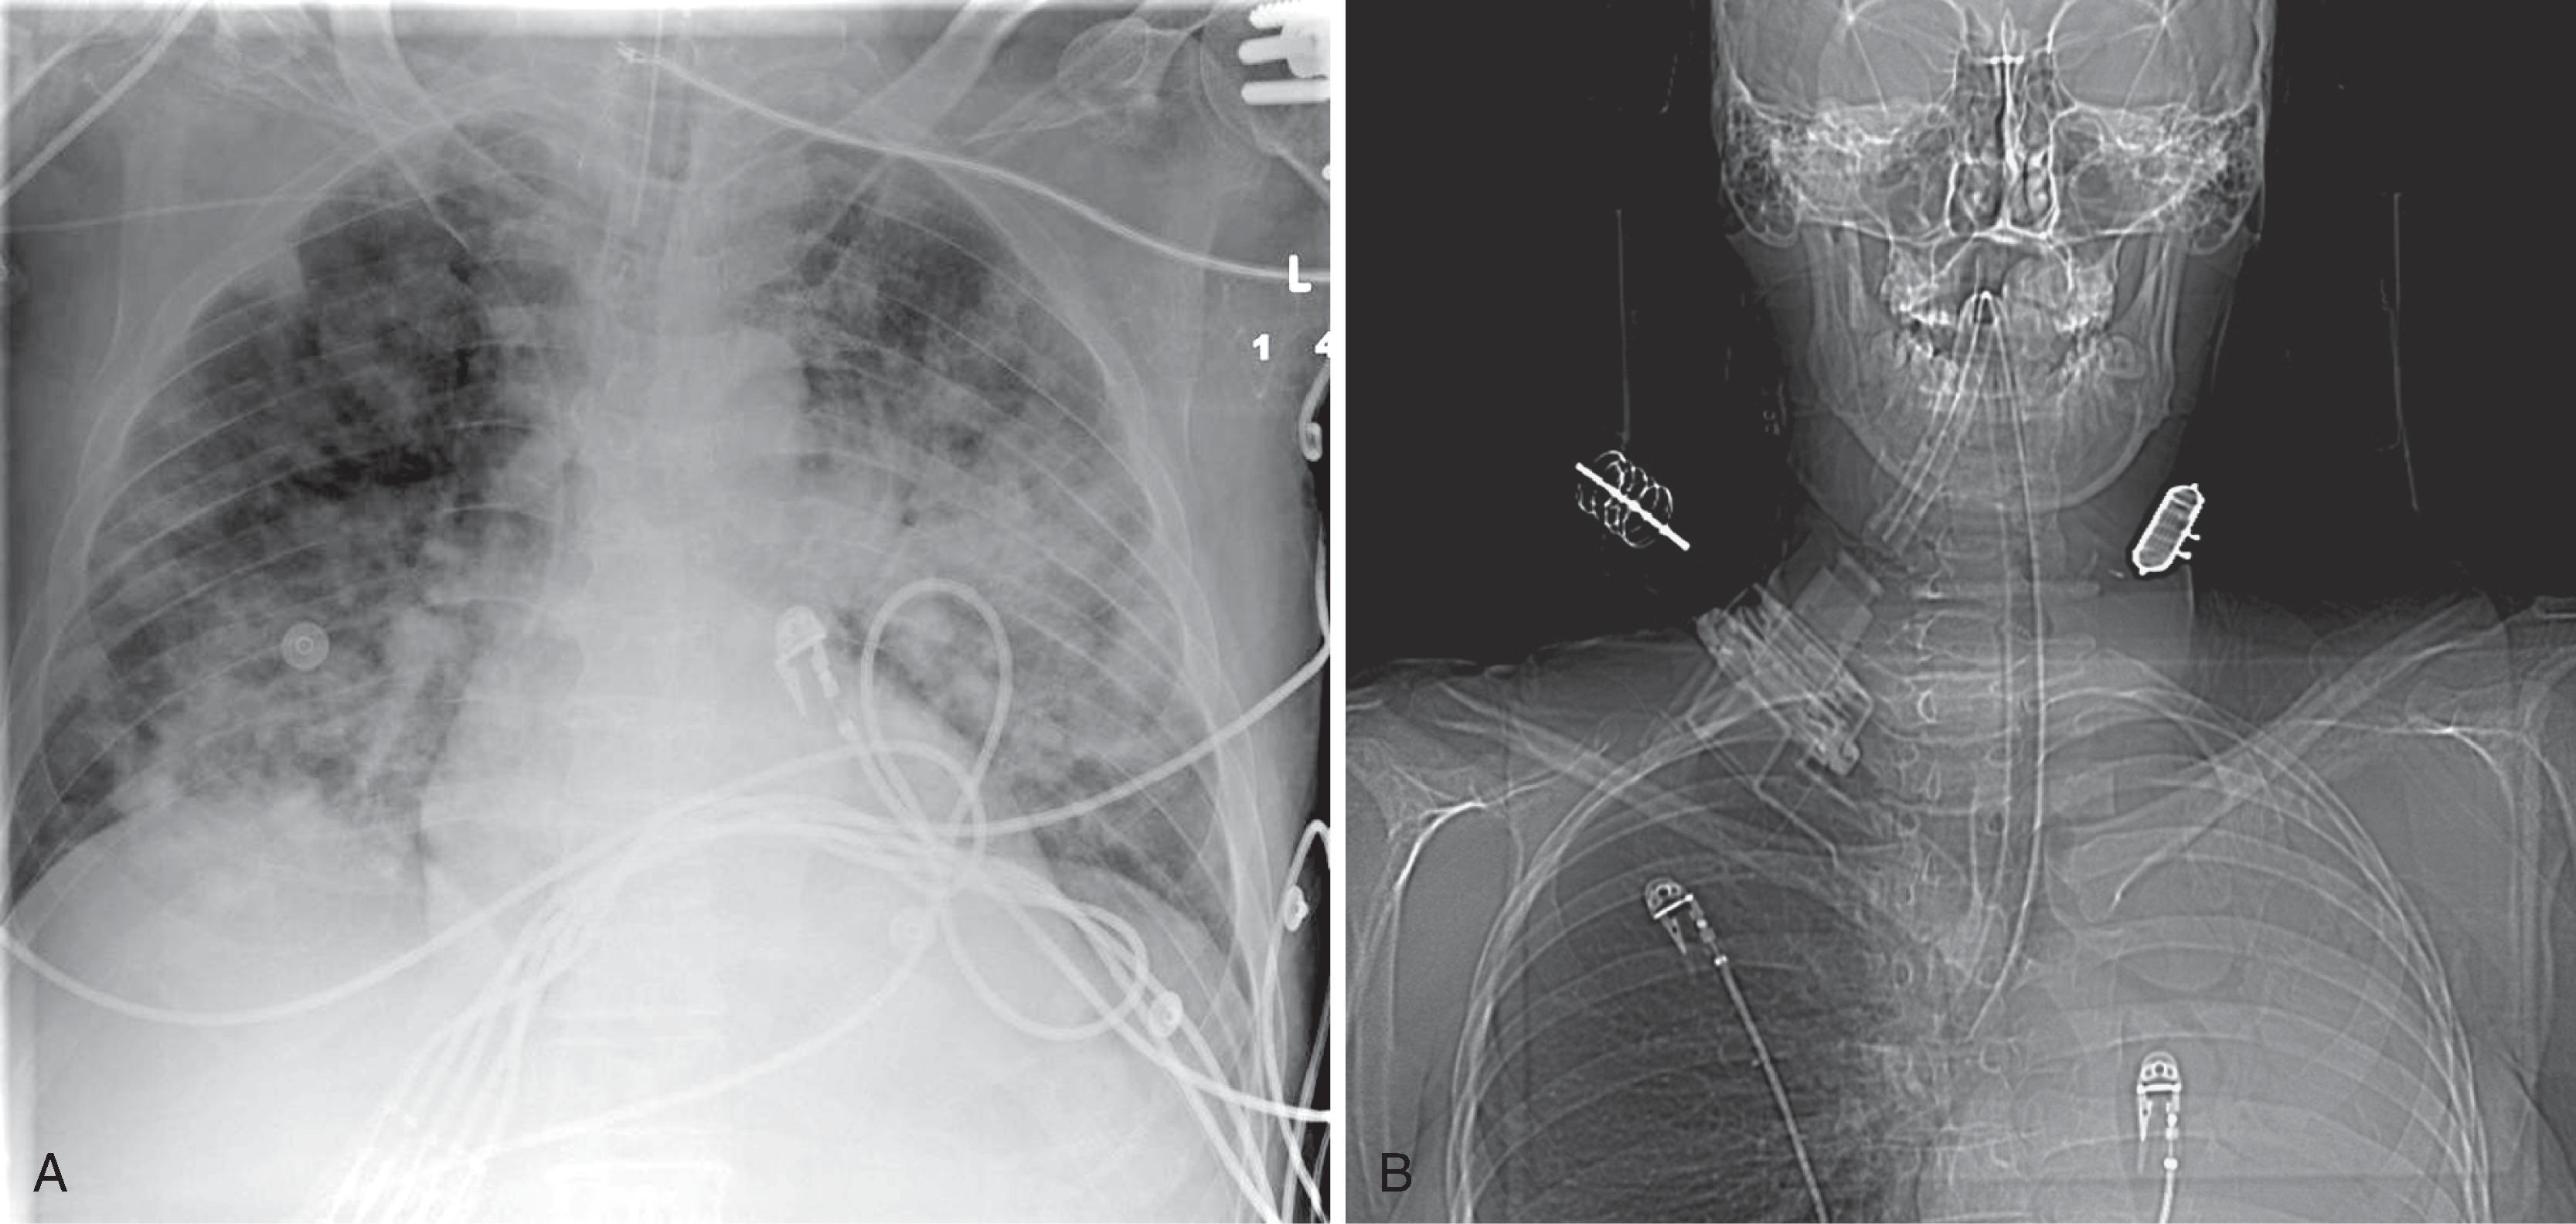 Fig. 2.31, (A) Anteroposterior (AP) portable chest radiograph. Most chest examinations in the intensive care unit are done with a portable x-ray machine in the AP projection. Note the acceptable position of the endotracheal tube (ETT) above the carina. A right subclavian central venous line is present with the tip in the superior vena cava. Multiple cables attached to monitors are noted crossing the chest. (B) An AP computed tomographic (CT) scout view obtained for a soft tissue neck study reveals an errant ETT in the right main bronchus resulting in nonaeration of the left lung.